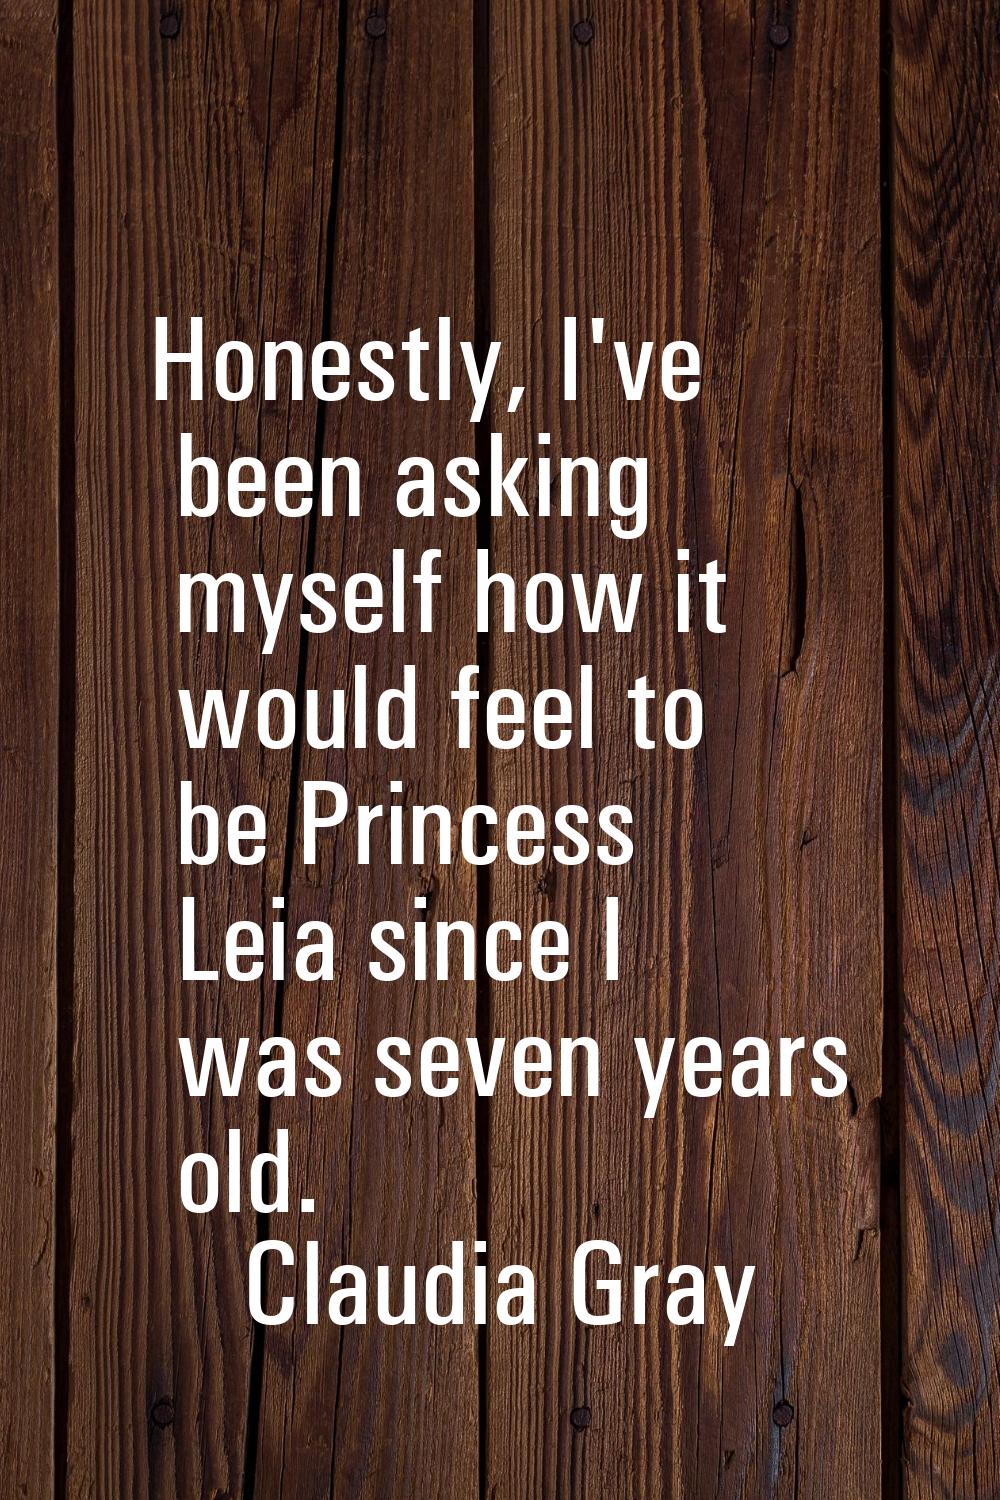 Honestly, I've been asking myself how it would feel to be Princess Leia since I was seven years old